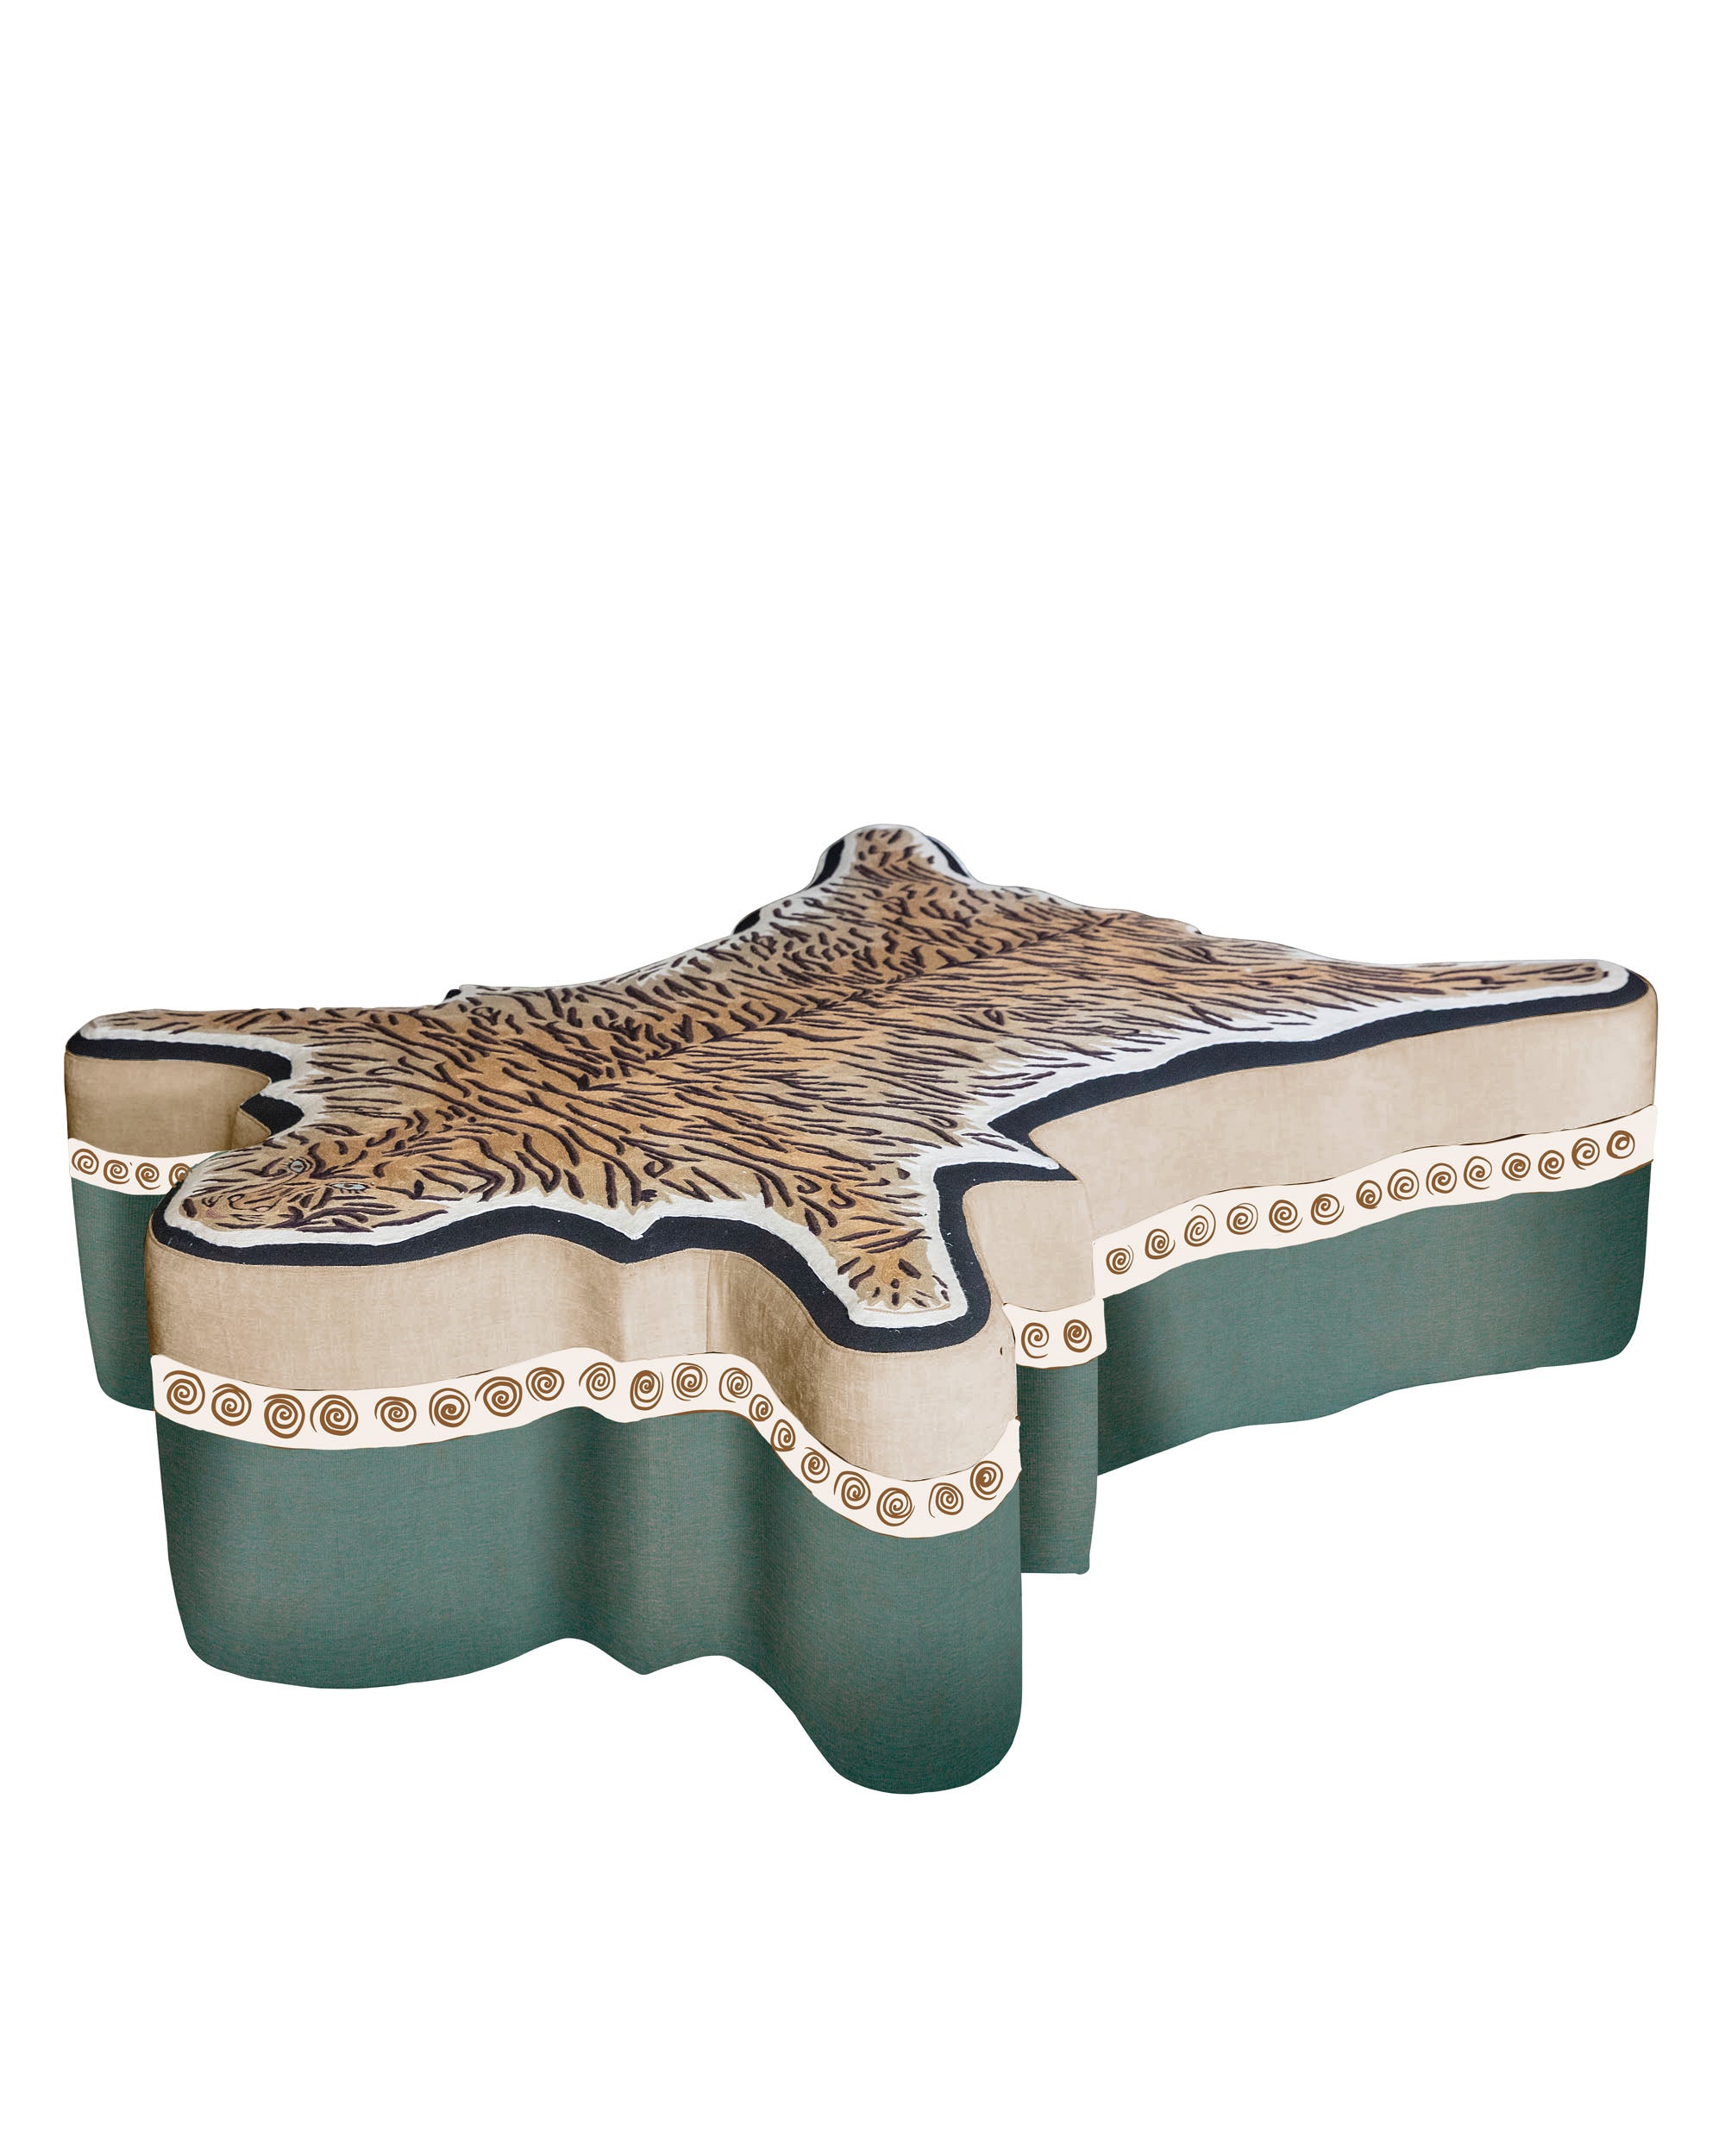  Upholstered ottoman with a leopard’s pelt embroidered in wool 100% (Petrol Blue)